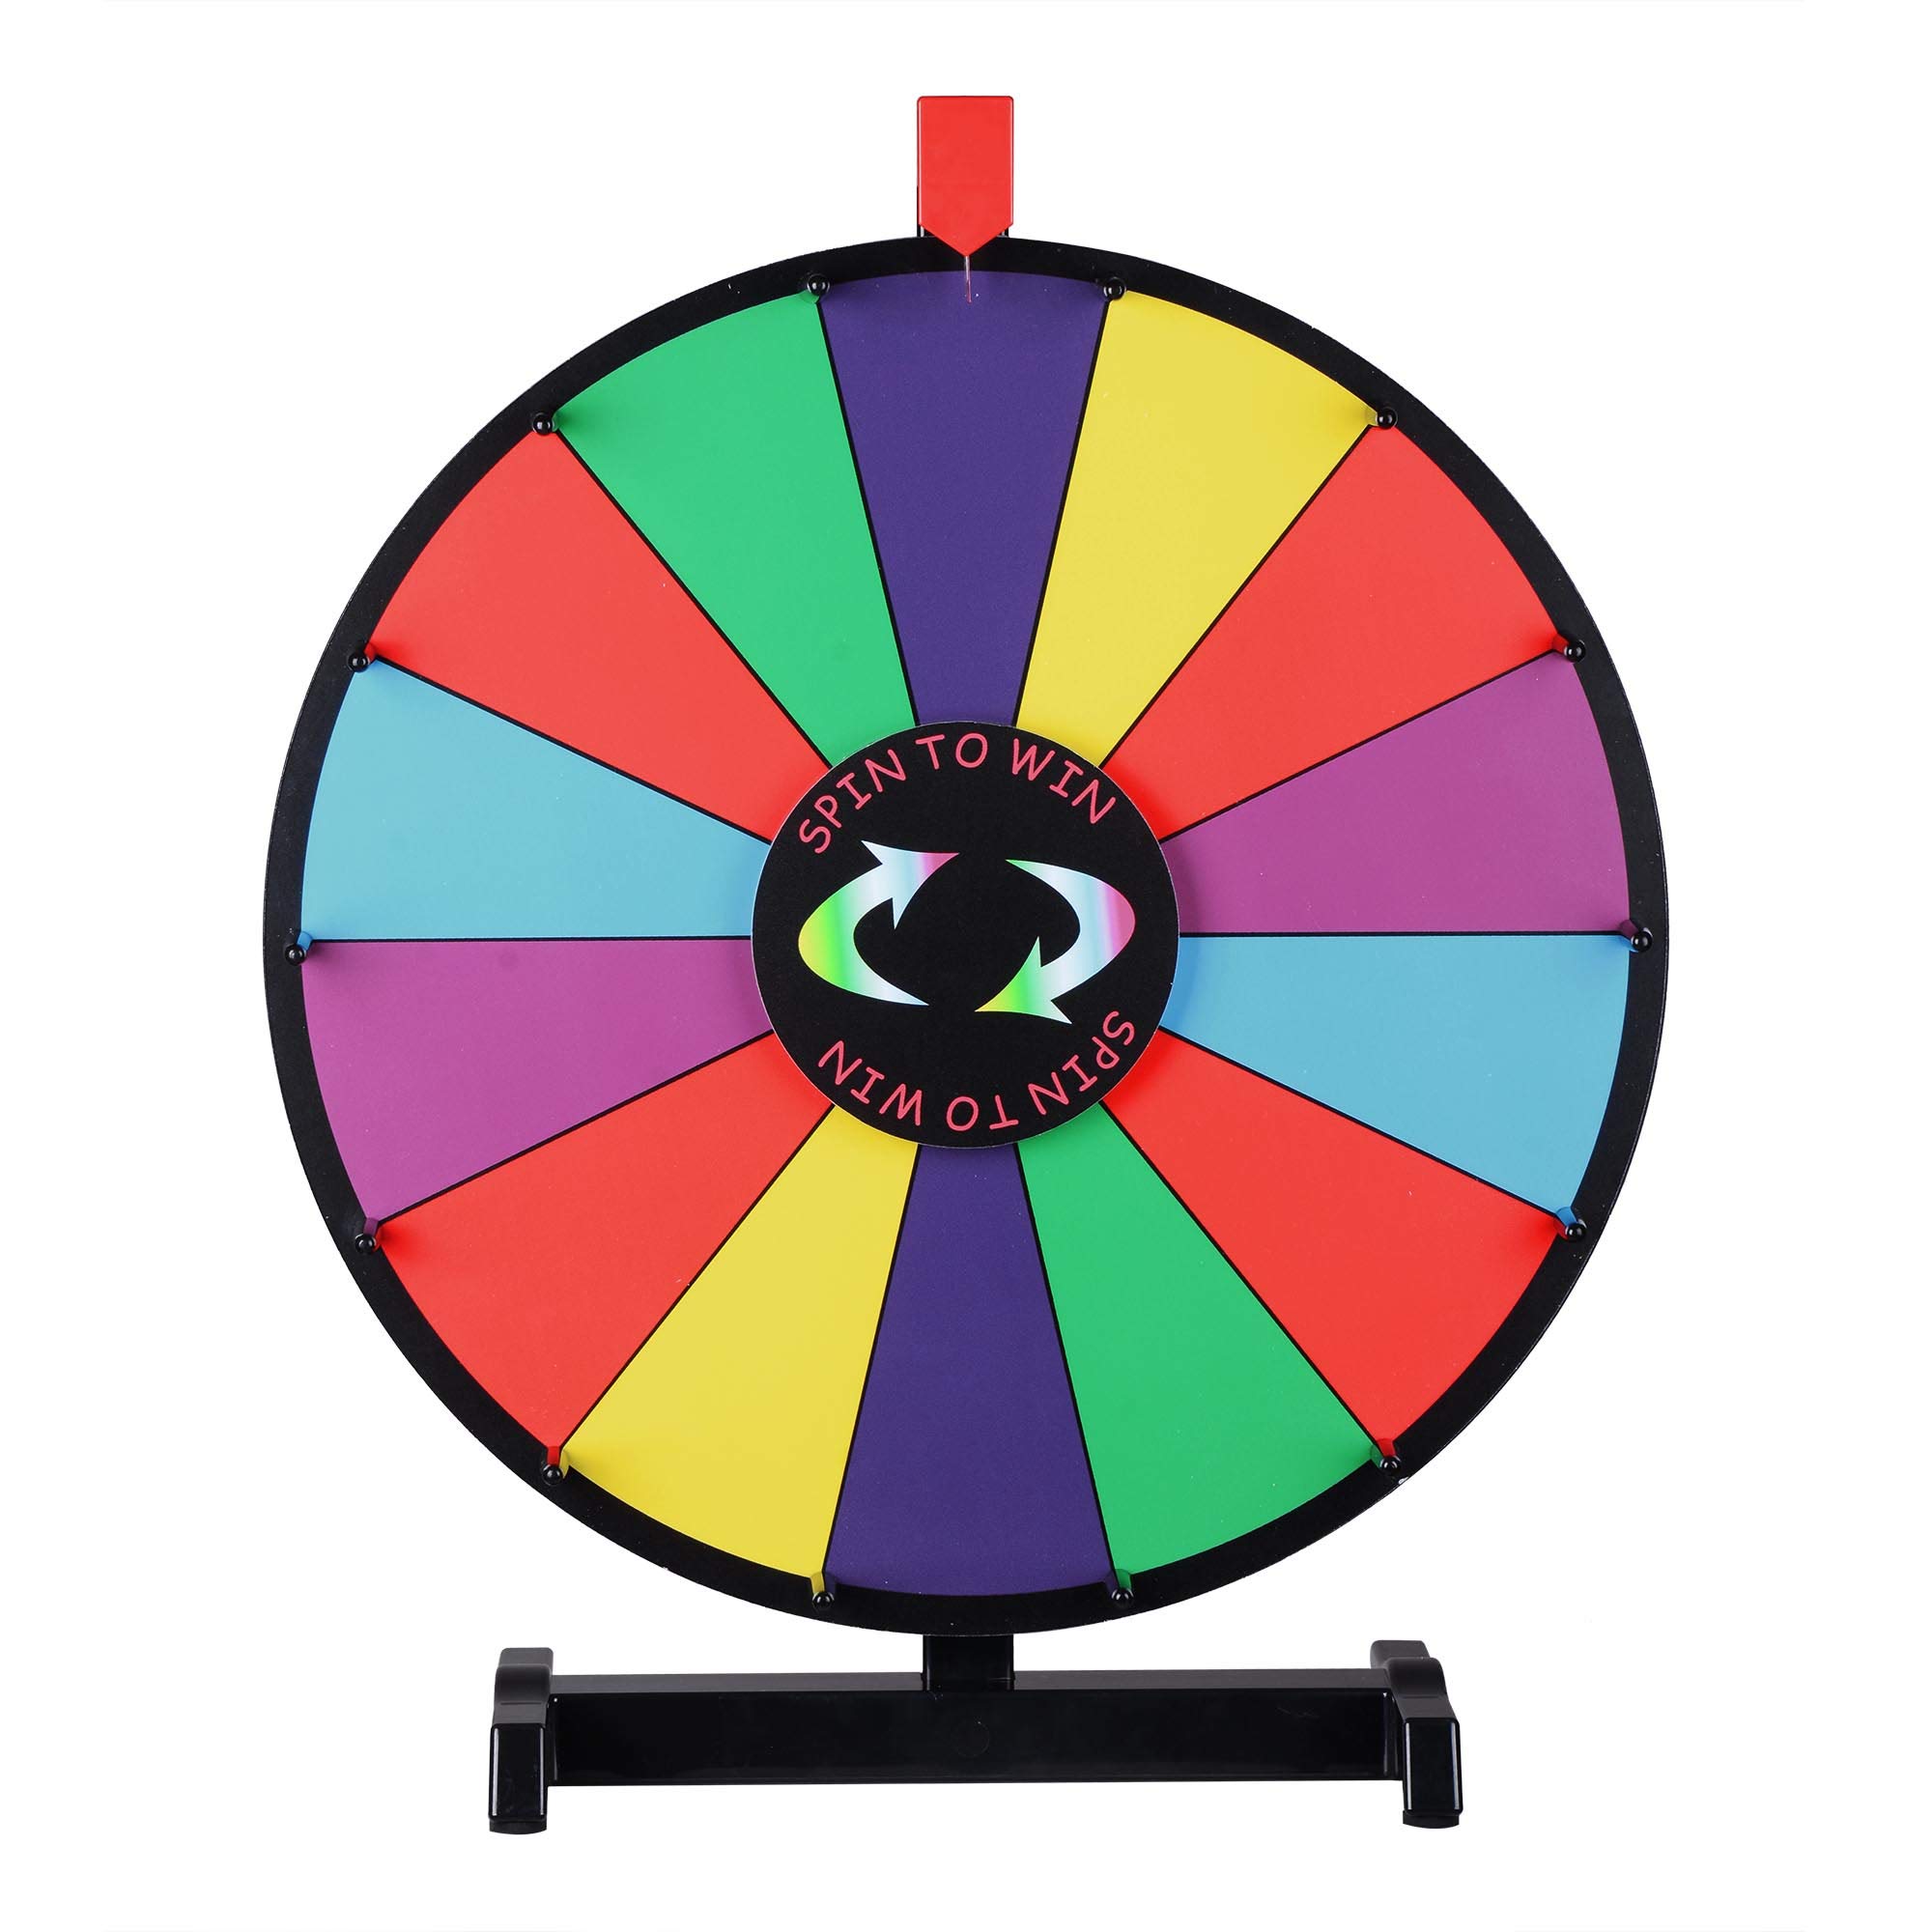 WinSpin 18-inch Round Tabletop color Prize Wheel 14 clicker Slots Heavy Duty Editable Spinning Wheel for Fortune Design carnival